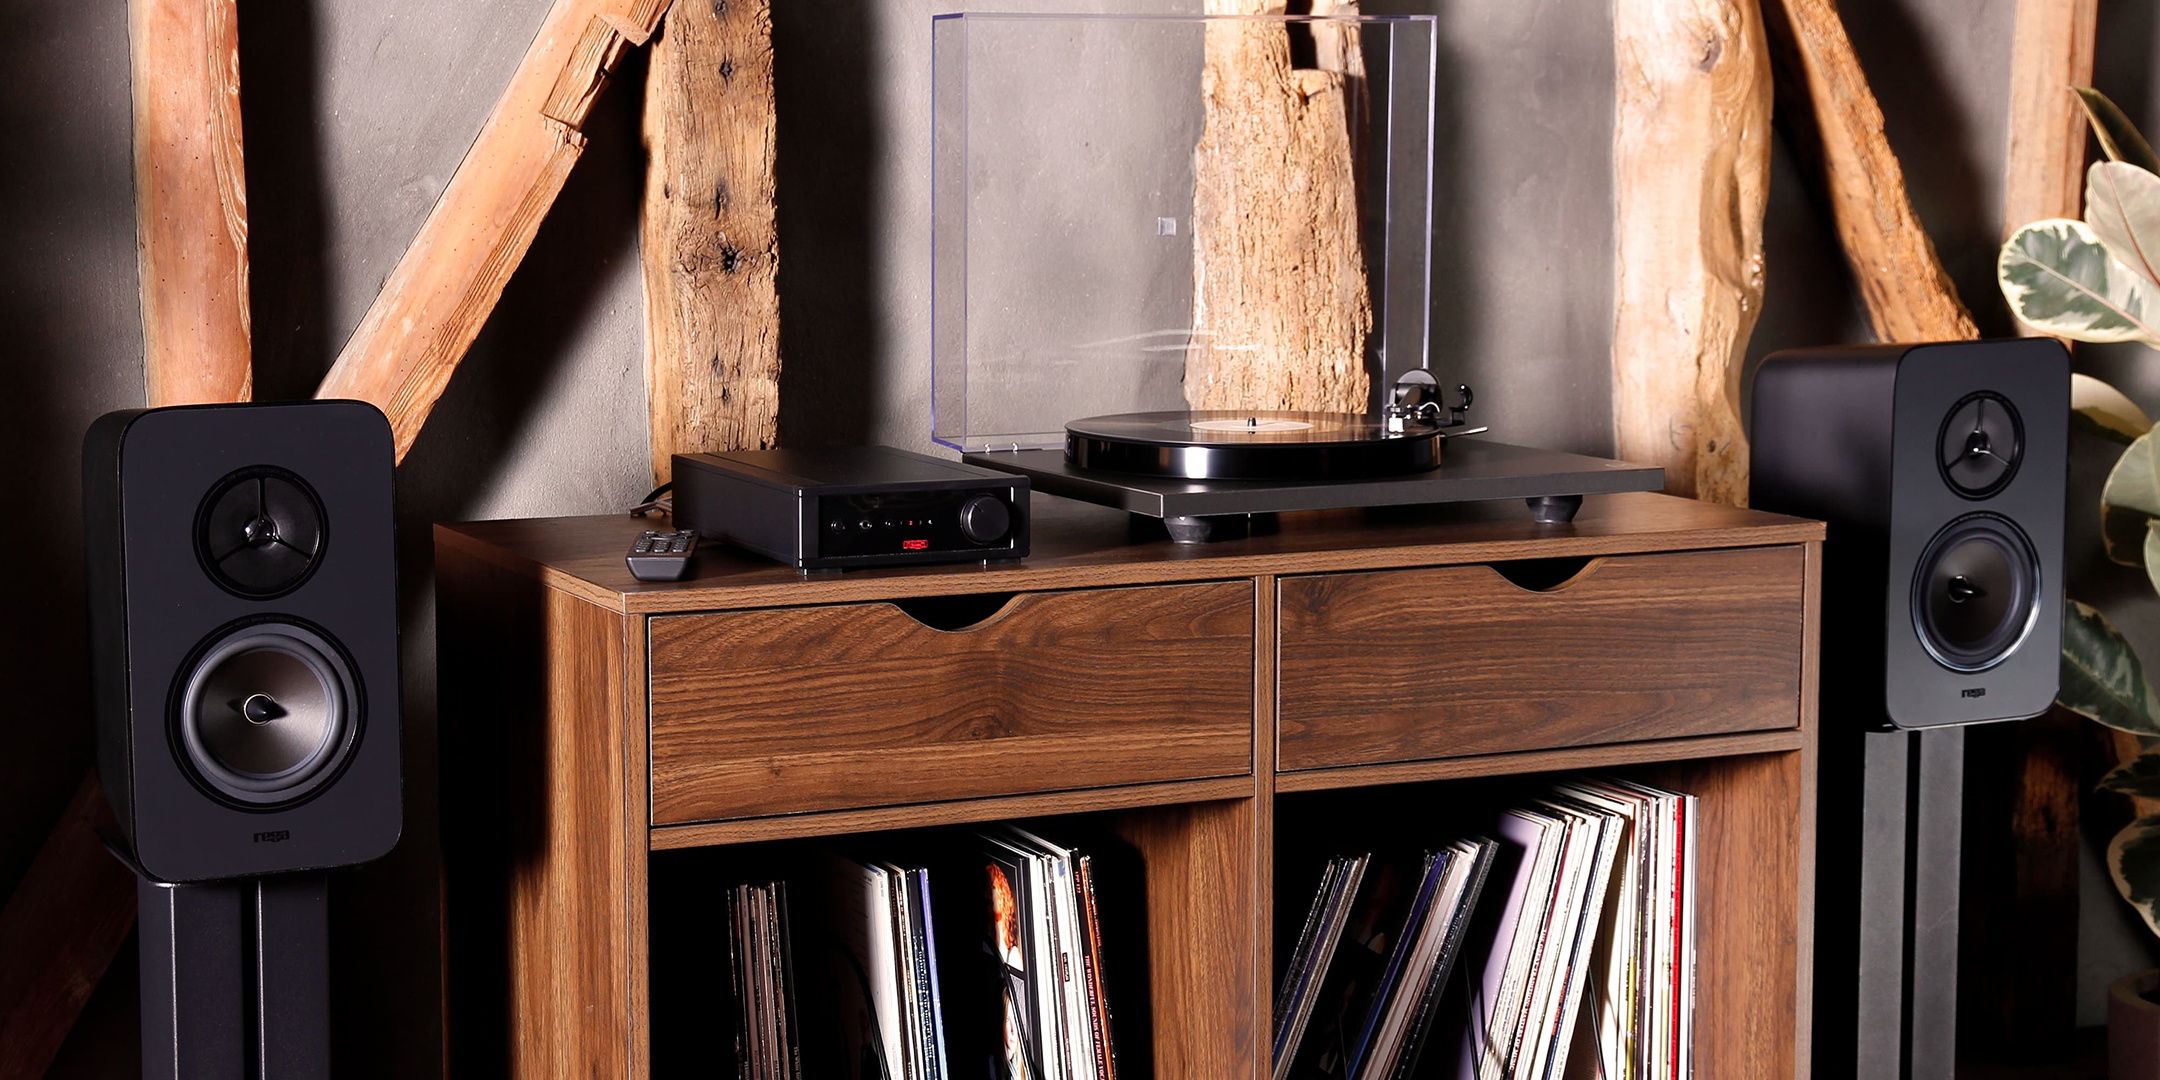 Pic showing a Rega System One audio system on a stylish wood sideboard. Speakers mounted on stands